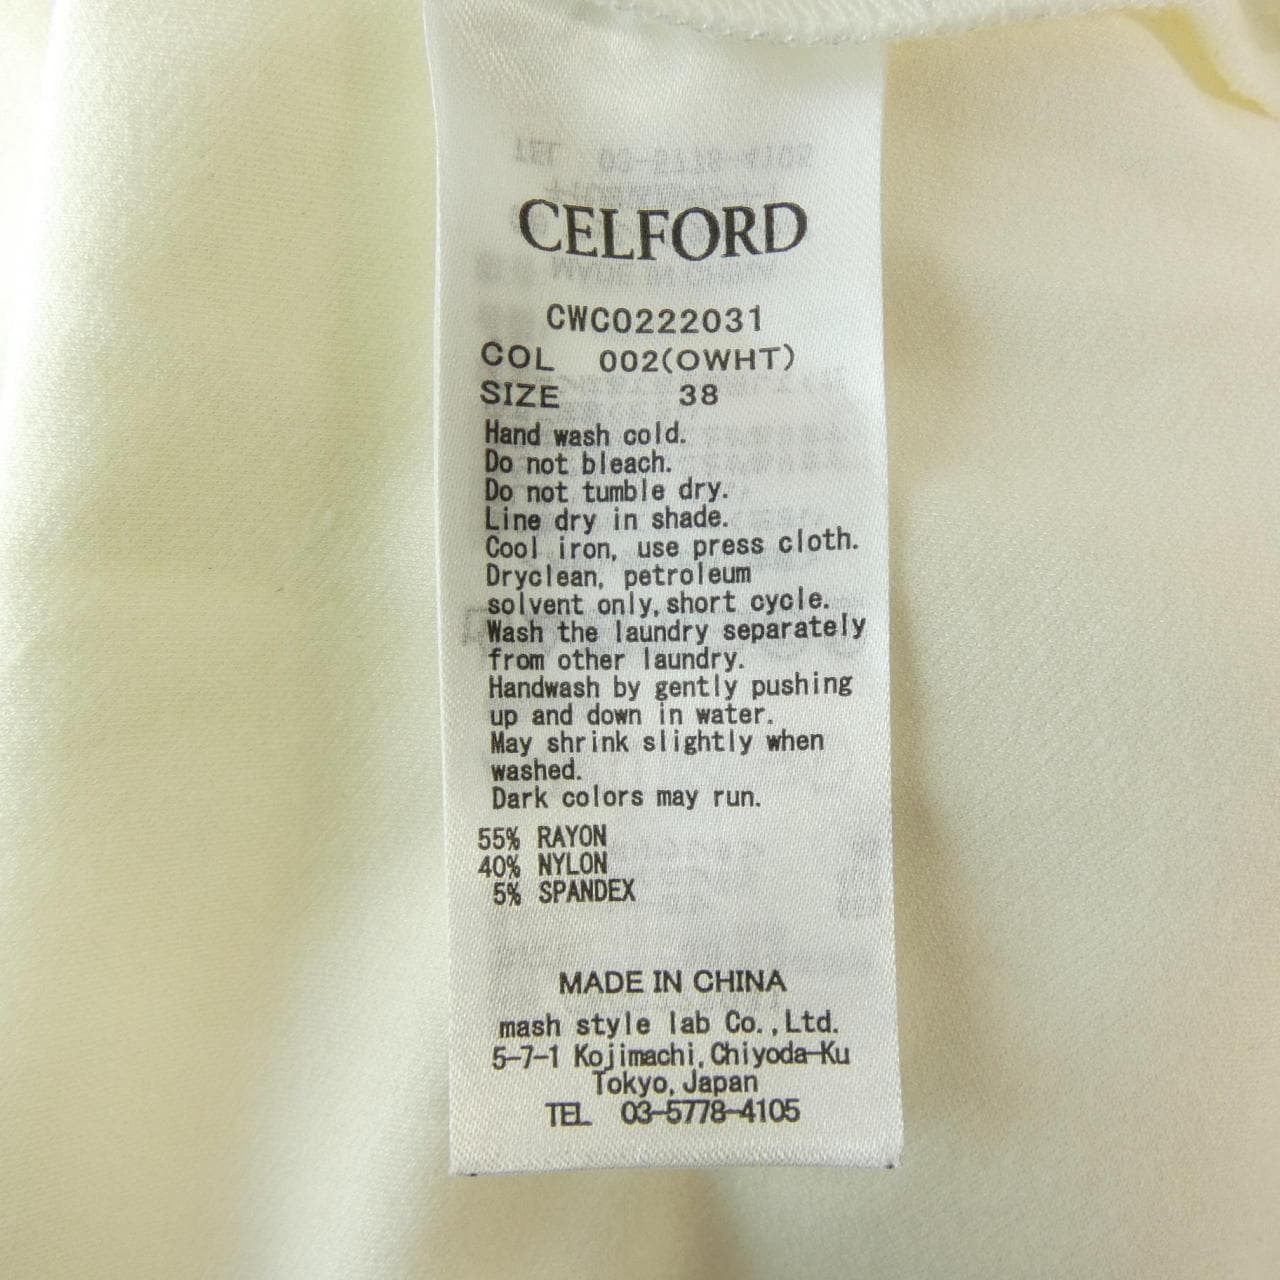 CELFORD tops